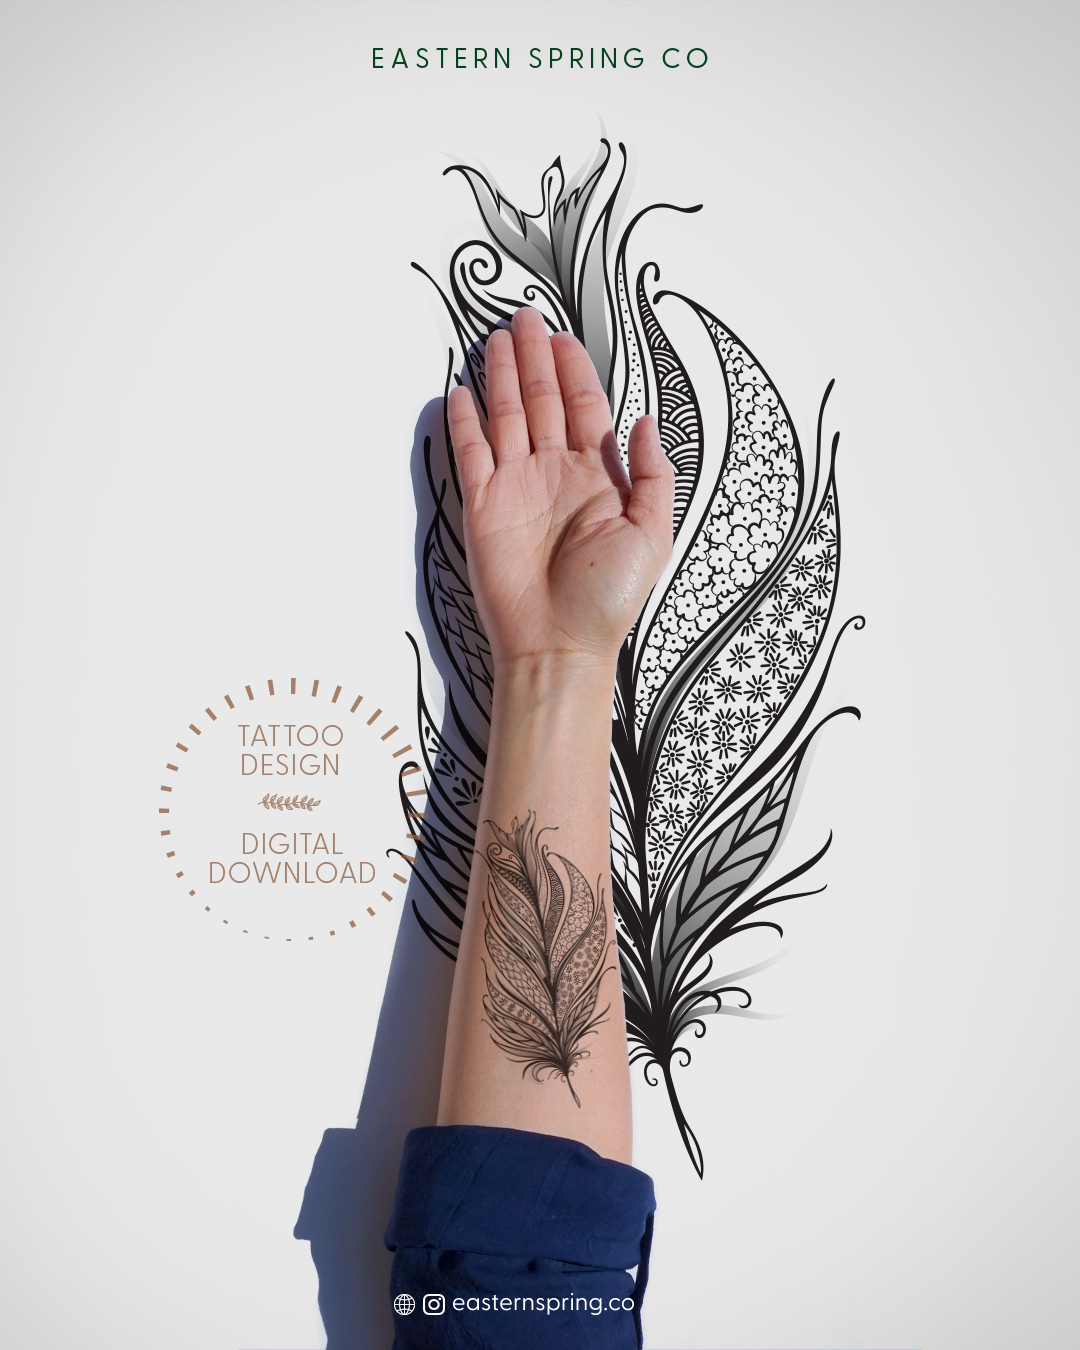 Eastern Spring Co artistic tattoo design, Freedom Feather